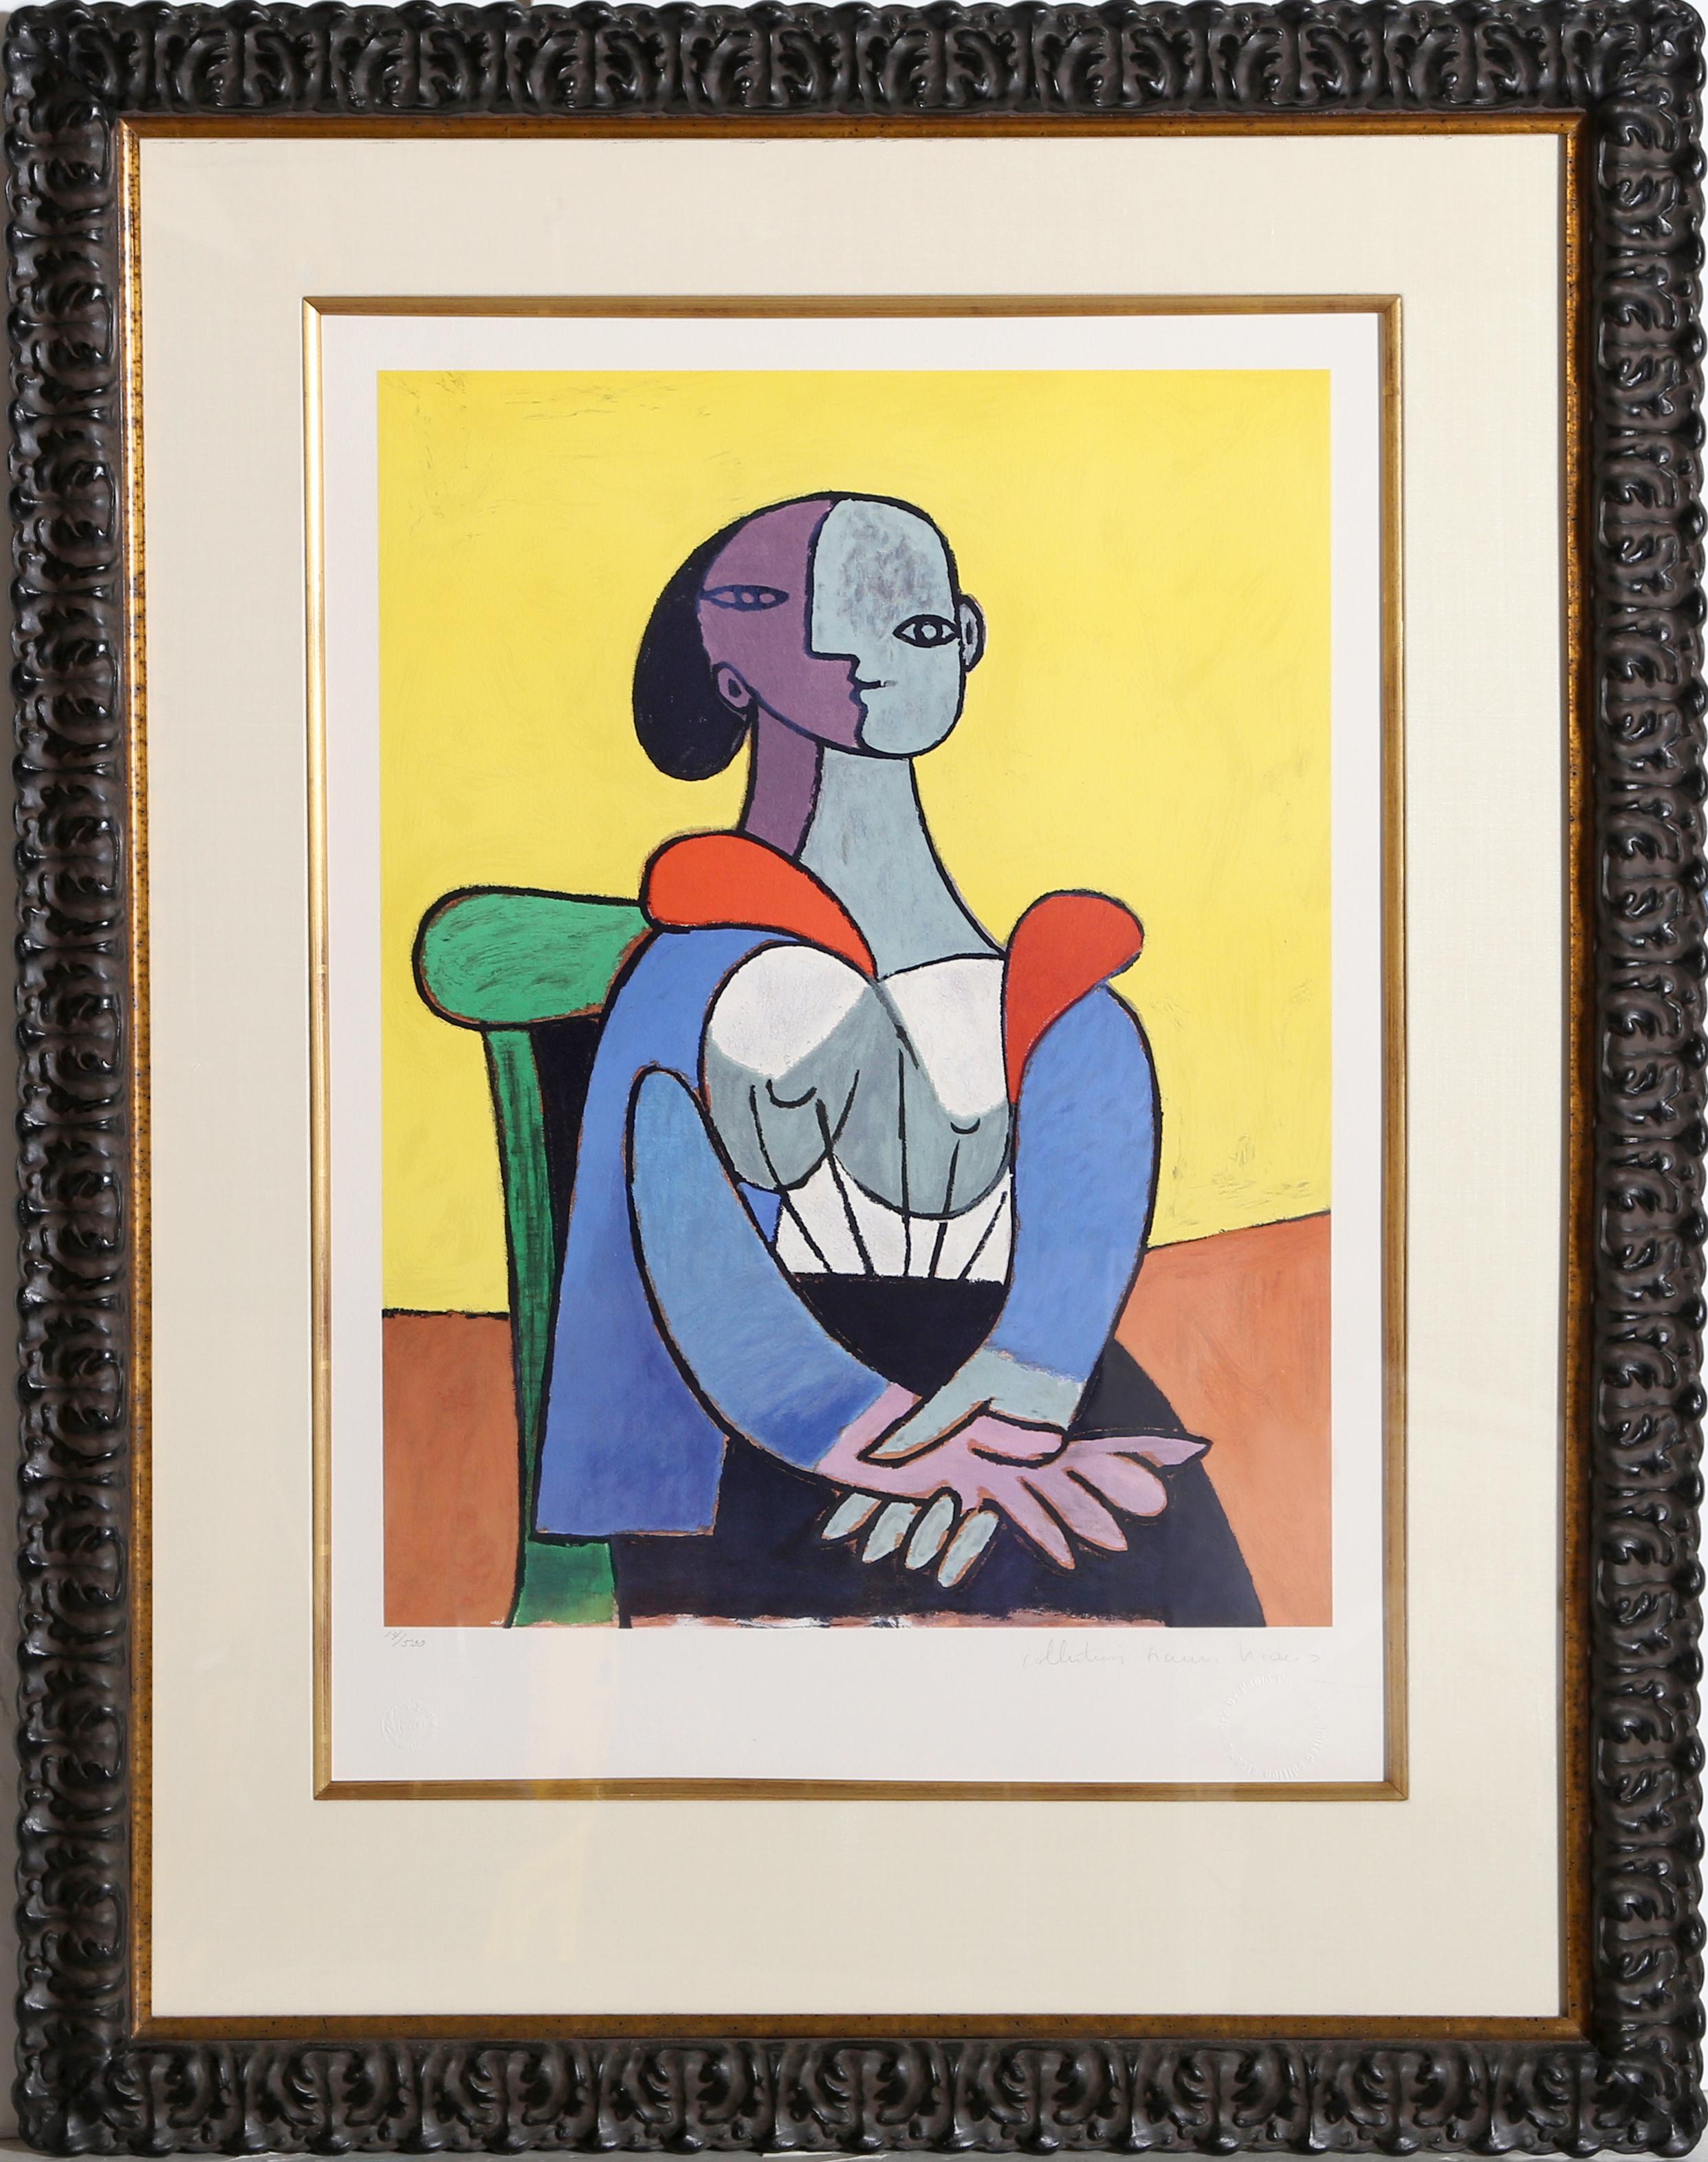 A lithograph from the Marina Picasso Estate Collection after the Pablo Picasso painting "Femme A La Chaise Sur Fond Jaune".  The original painting was completed in 1937. In the 1970's after Picasso's death, Marina Picasso, his granddaughter,